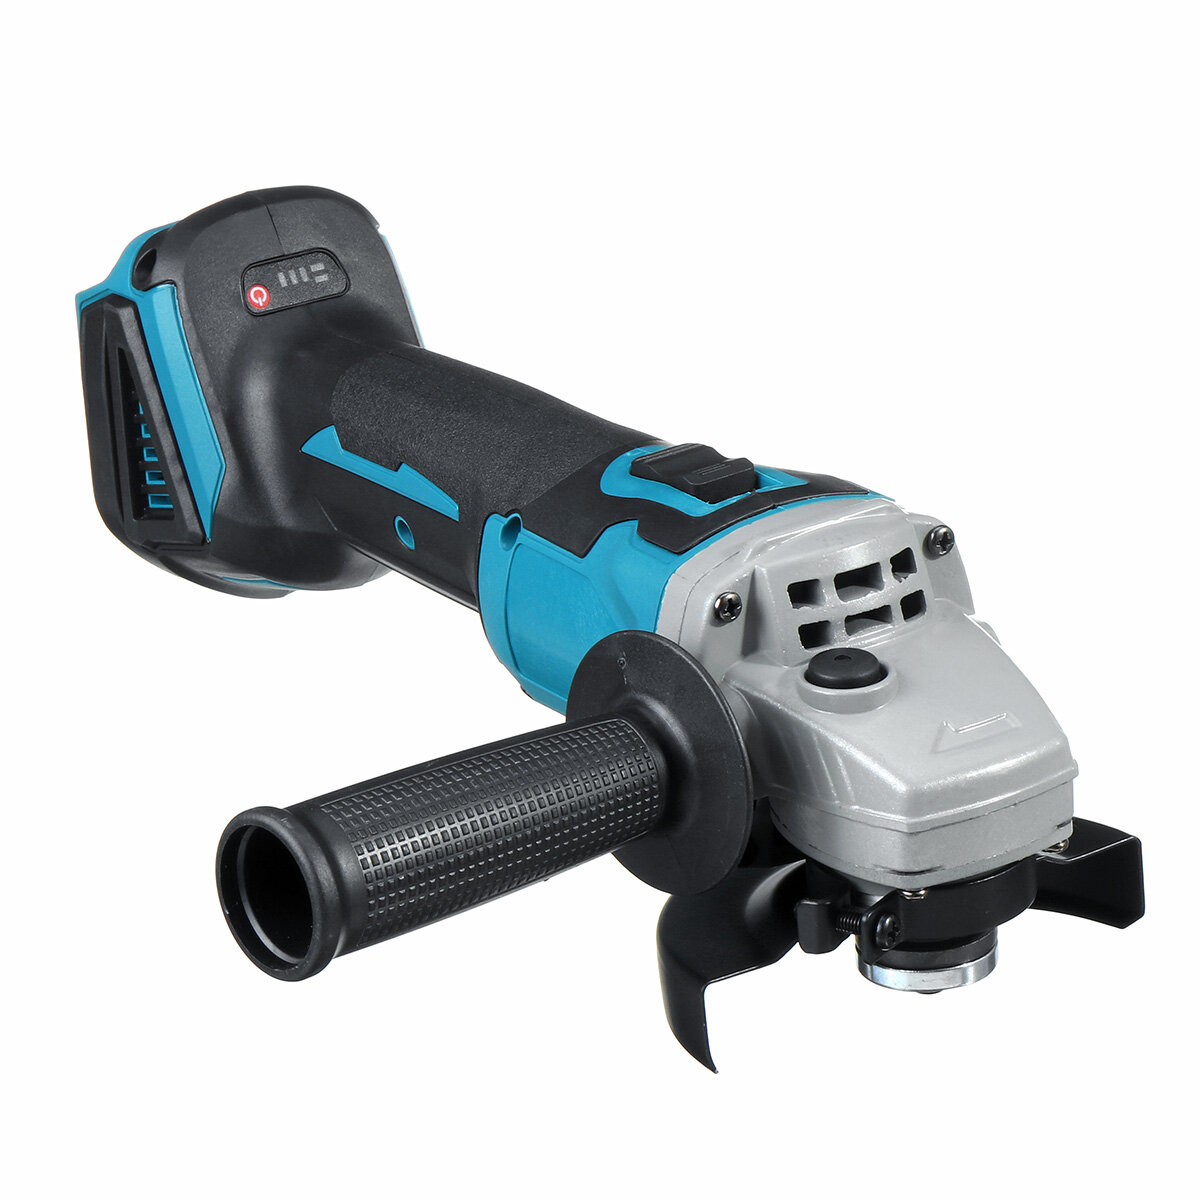 best price,drillpro,18v,800w,125mm,brushless,angle,grinder,for,makita,eu,discount